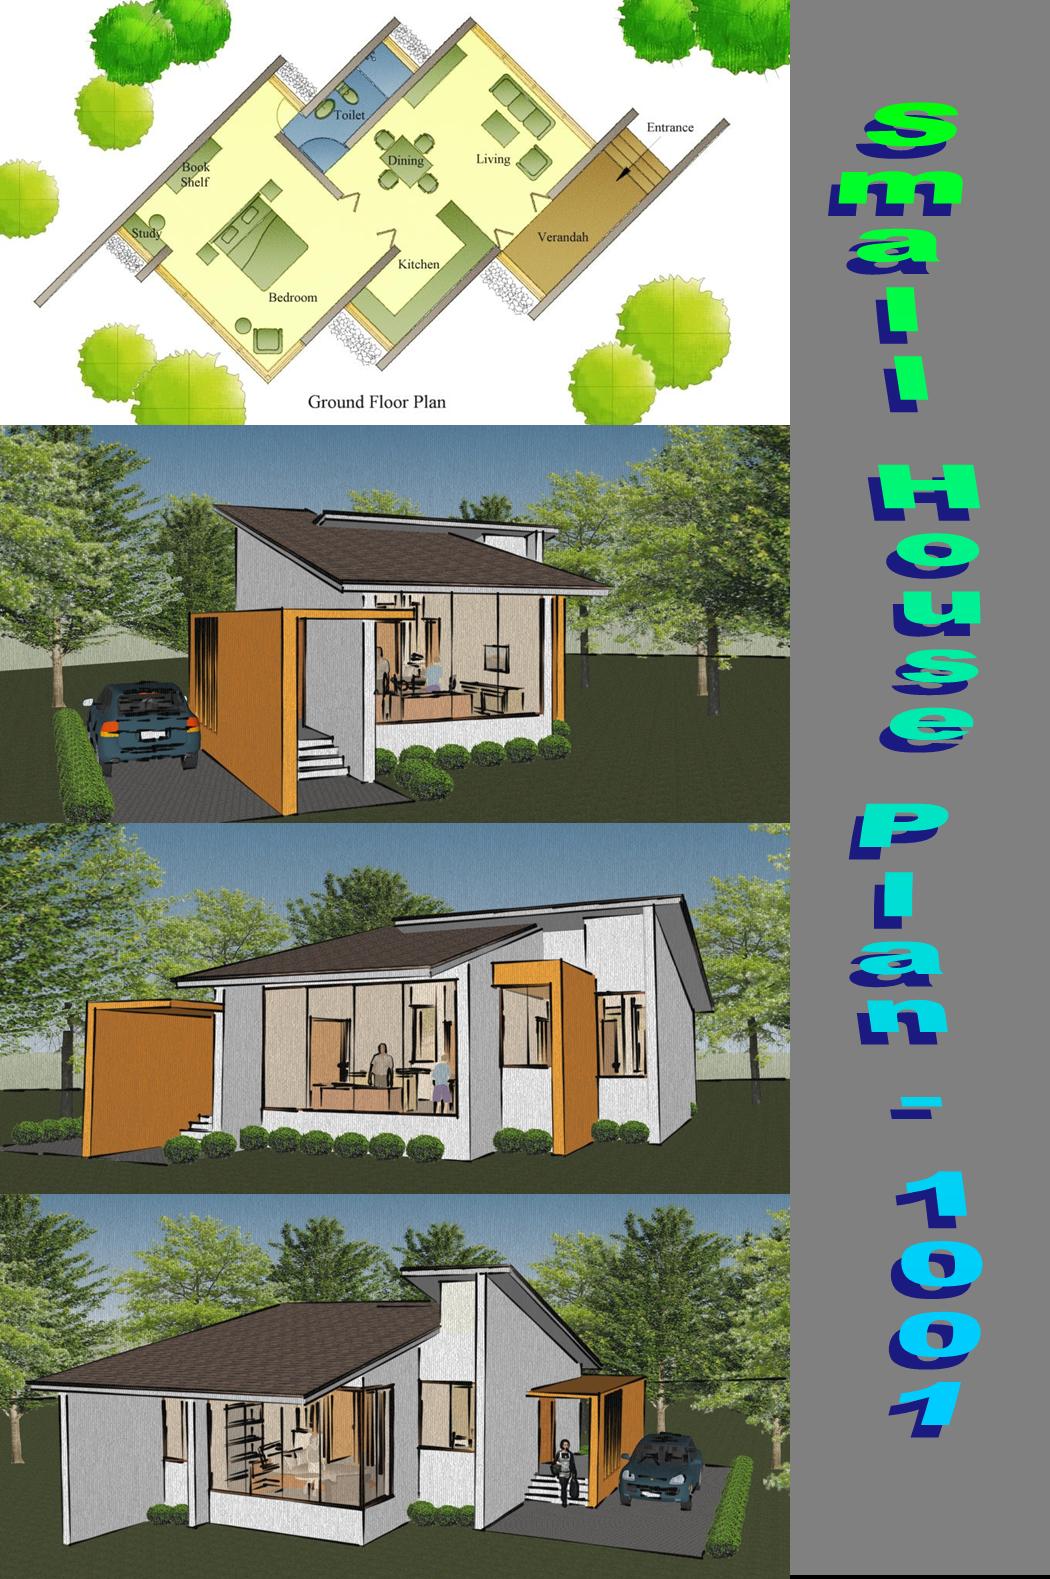 Home Plans in India: 5 Best Small Home Plans from HomePlansIndia.com